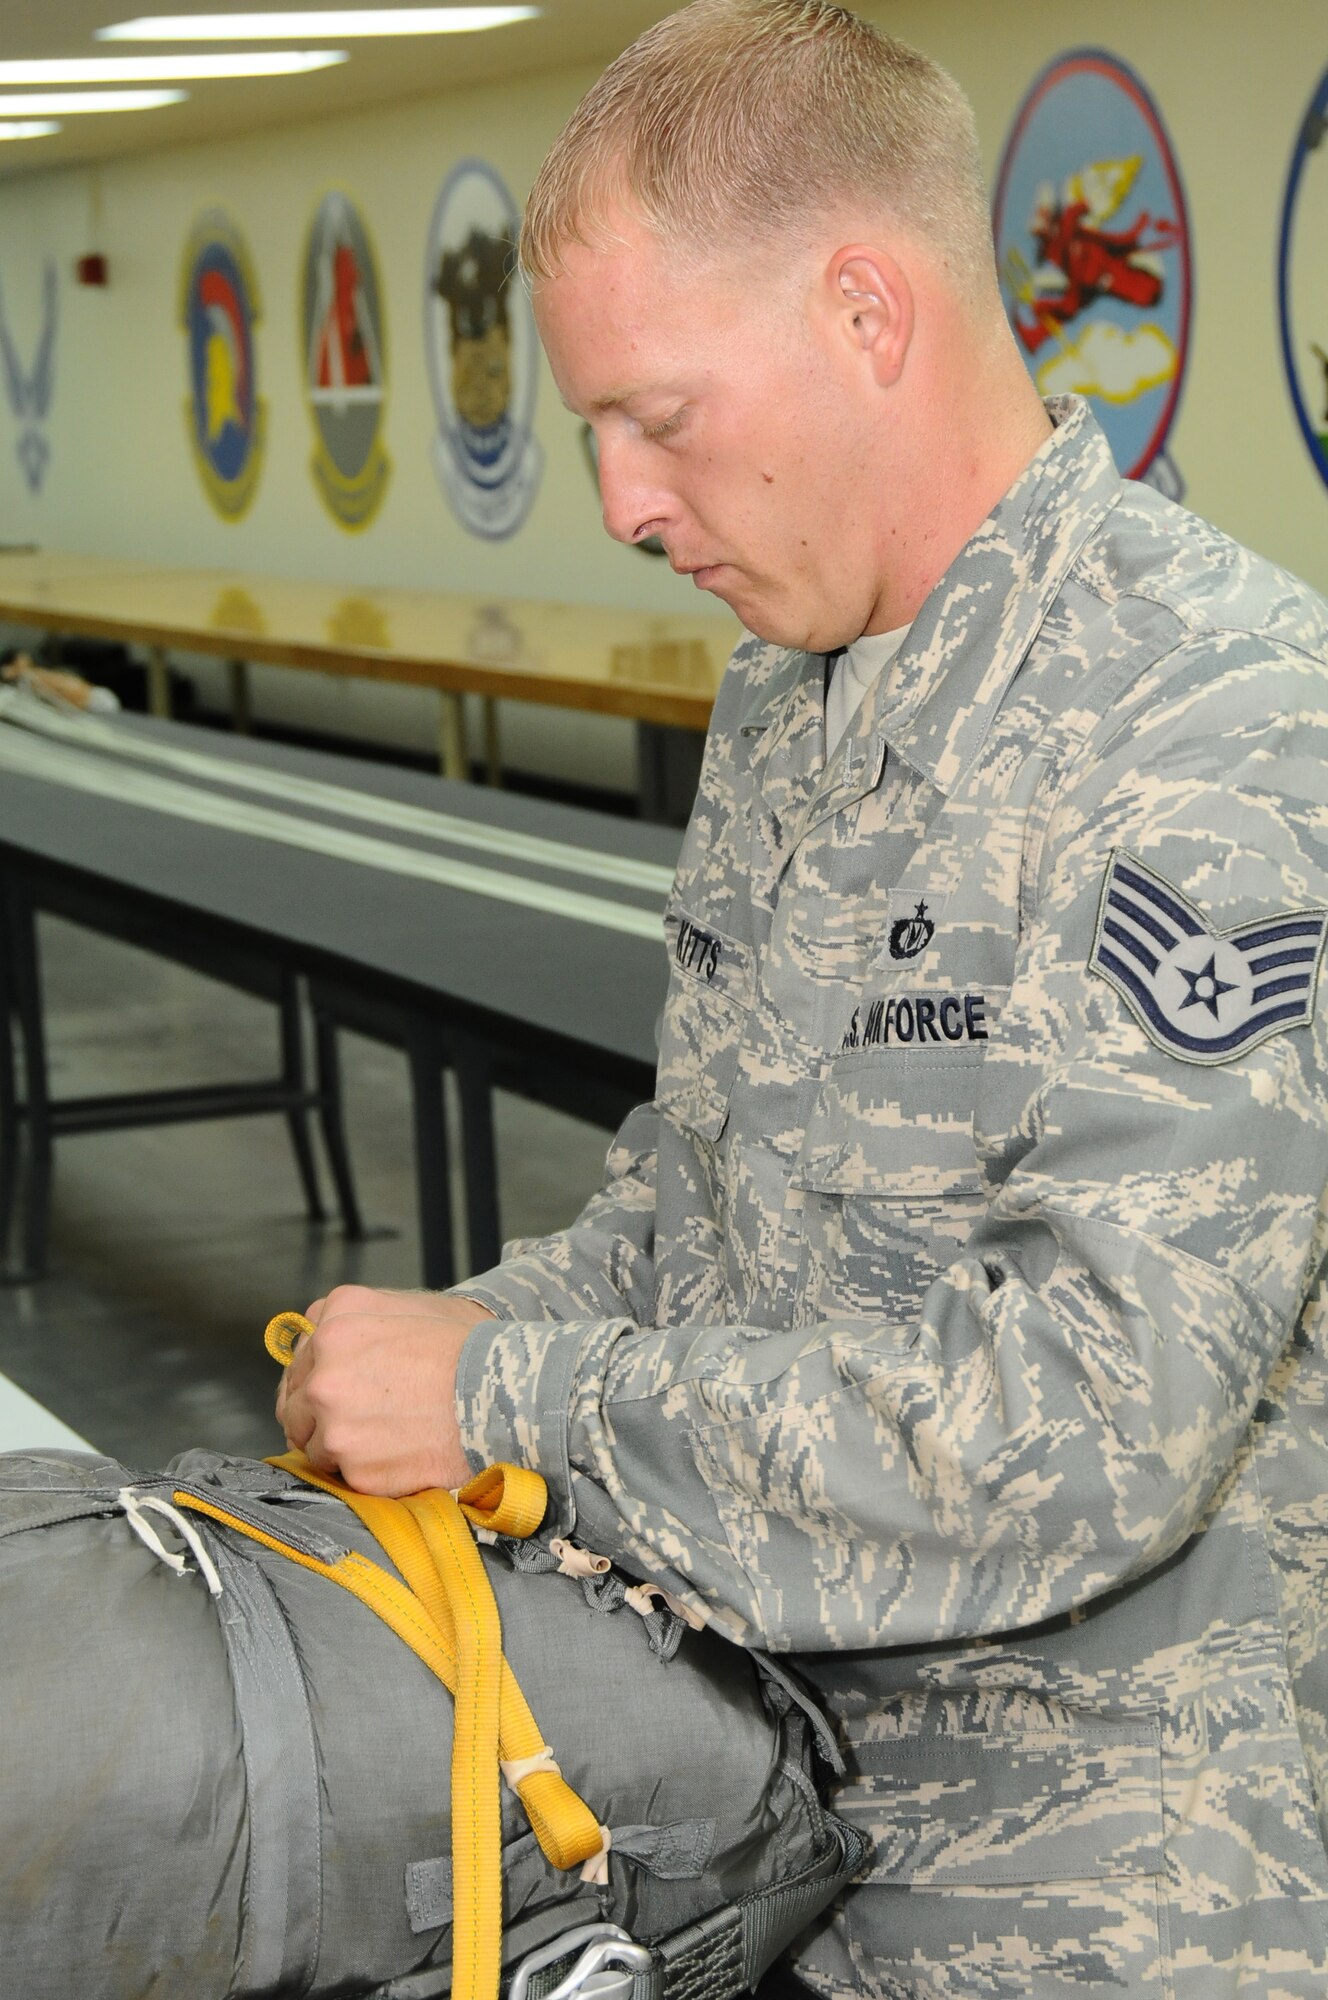 ANDERSEN AIR FORCE BASE, Guam – Staff Sgt. Christopher Kitts, 36th Operations Support Squadron aircrew flight equipment specialist, secures the static line cord into the parachute back, Sept. 11. The static line is what will be connected to the aircraft before the jumper or cargo pallet vacates the aircraft, using the plane to pull out the parachute. (U.S. Air Force photo by Senior Airman Carlin Leslie/Released)